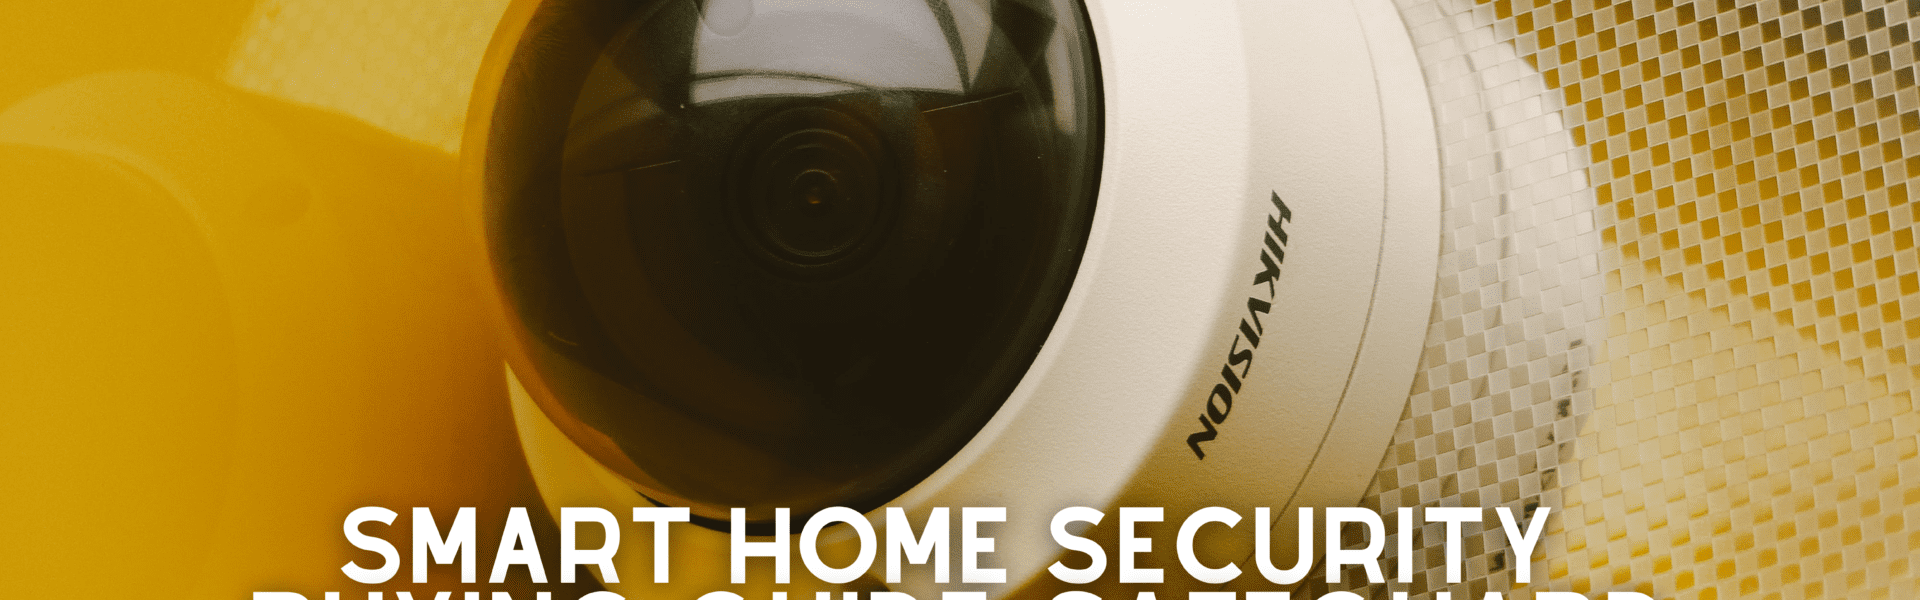 smart home security buying guide